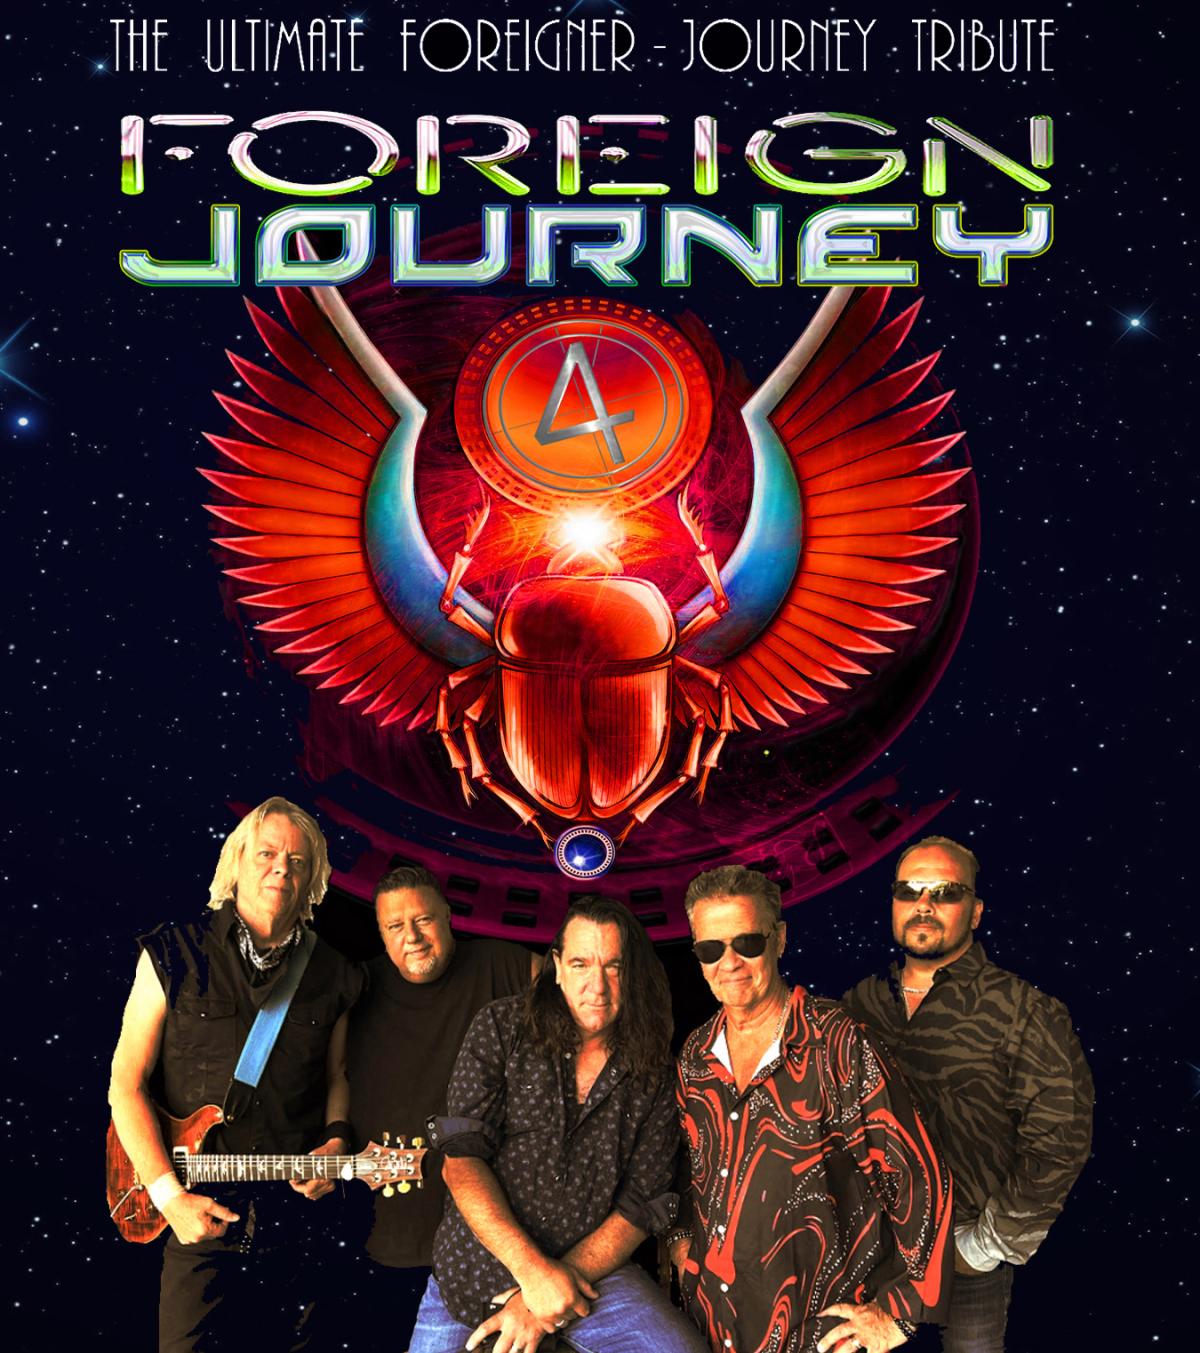 A graphic featuring members of the band Foreign Journey with their winged logo in the background.